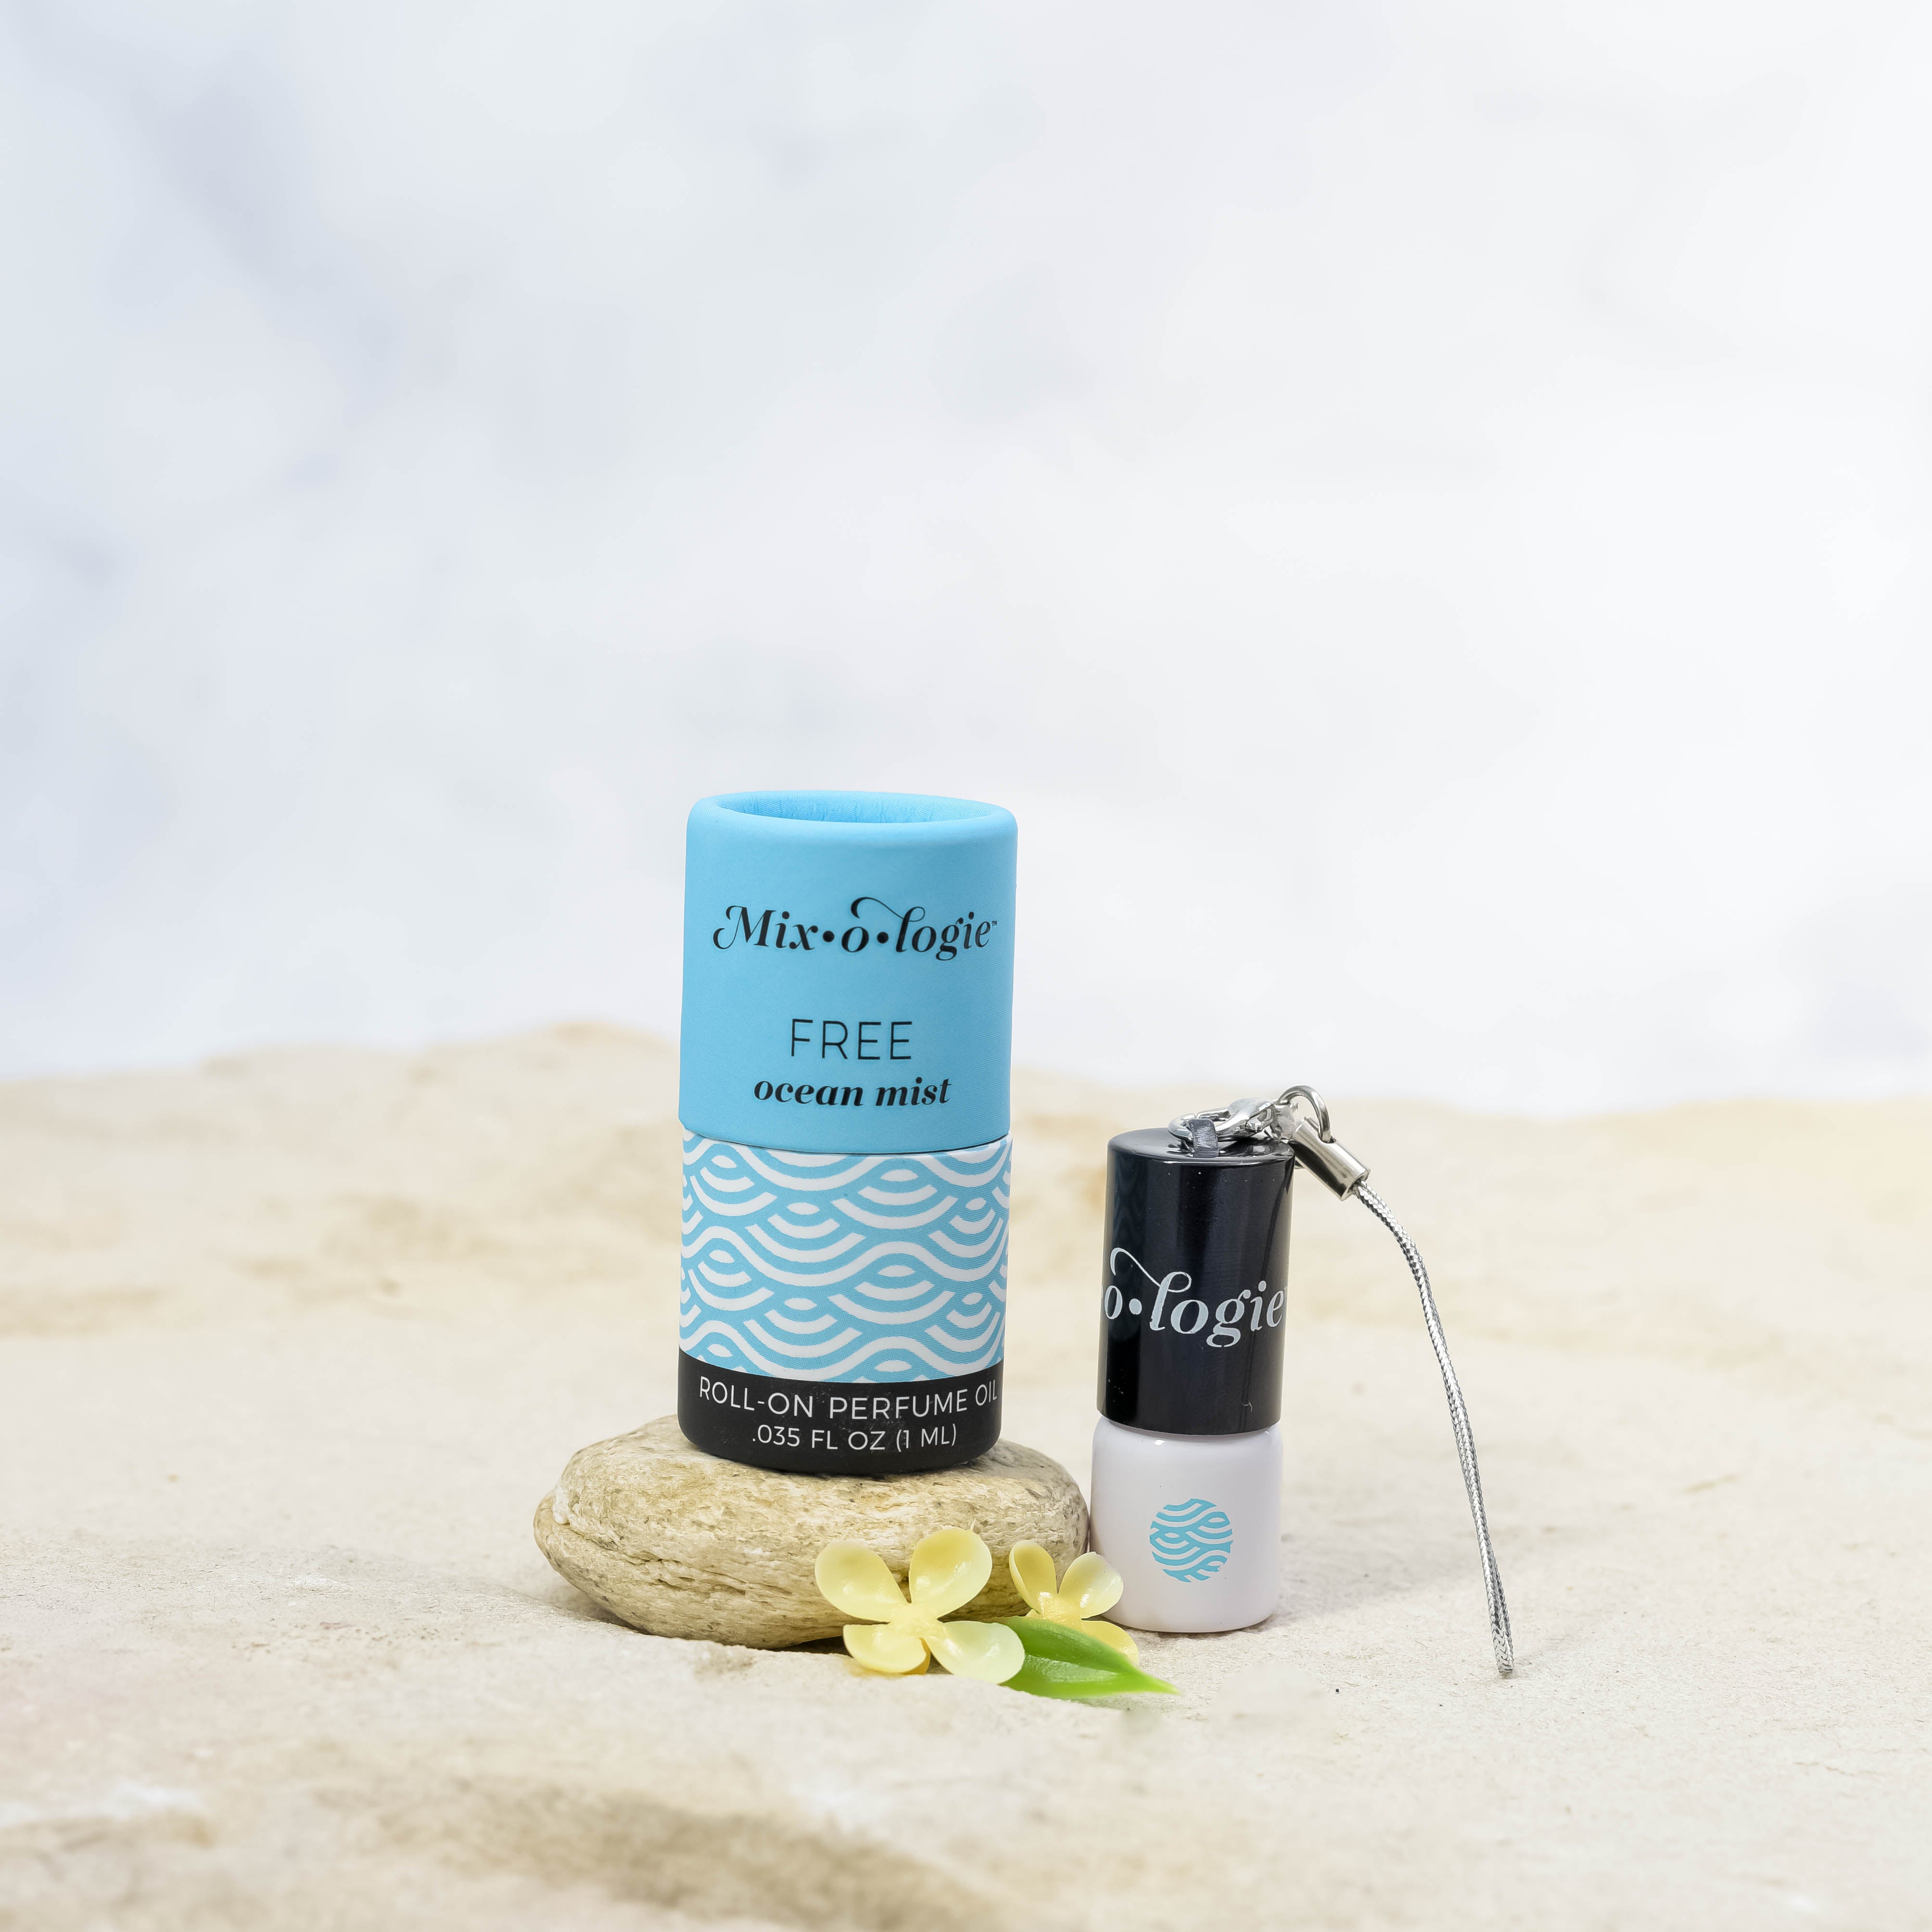 Free (Ocean Mist) mini white cylinder rollerballs with black top and keychain attachment with pale blue wave-like pattern and has .035 fl oz or 1 mL. Pale blue cylinder packing tube with pale blue wave-like pattern. Roll-on perfume oil. Mini rollerball and cylinder tube are in sand on a rock with yellow flowers.